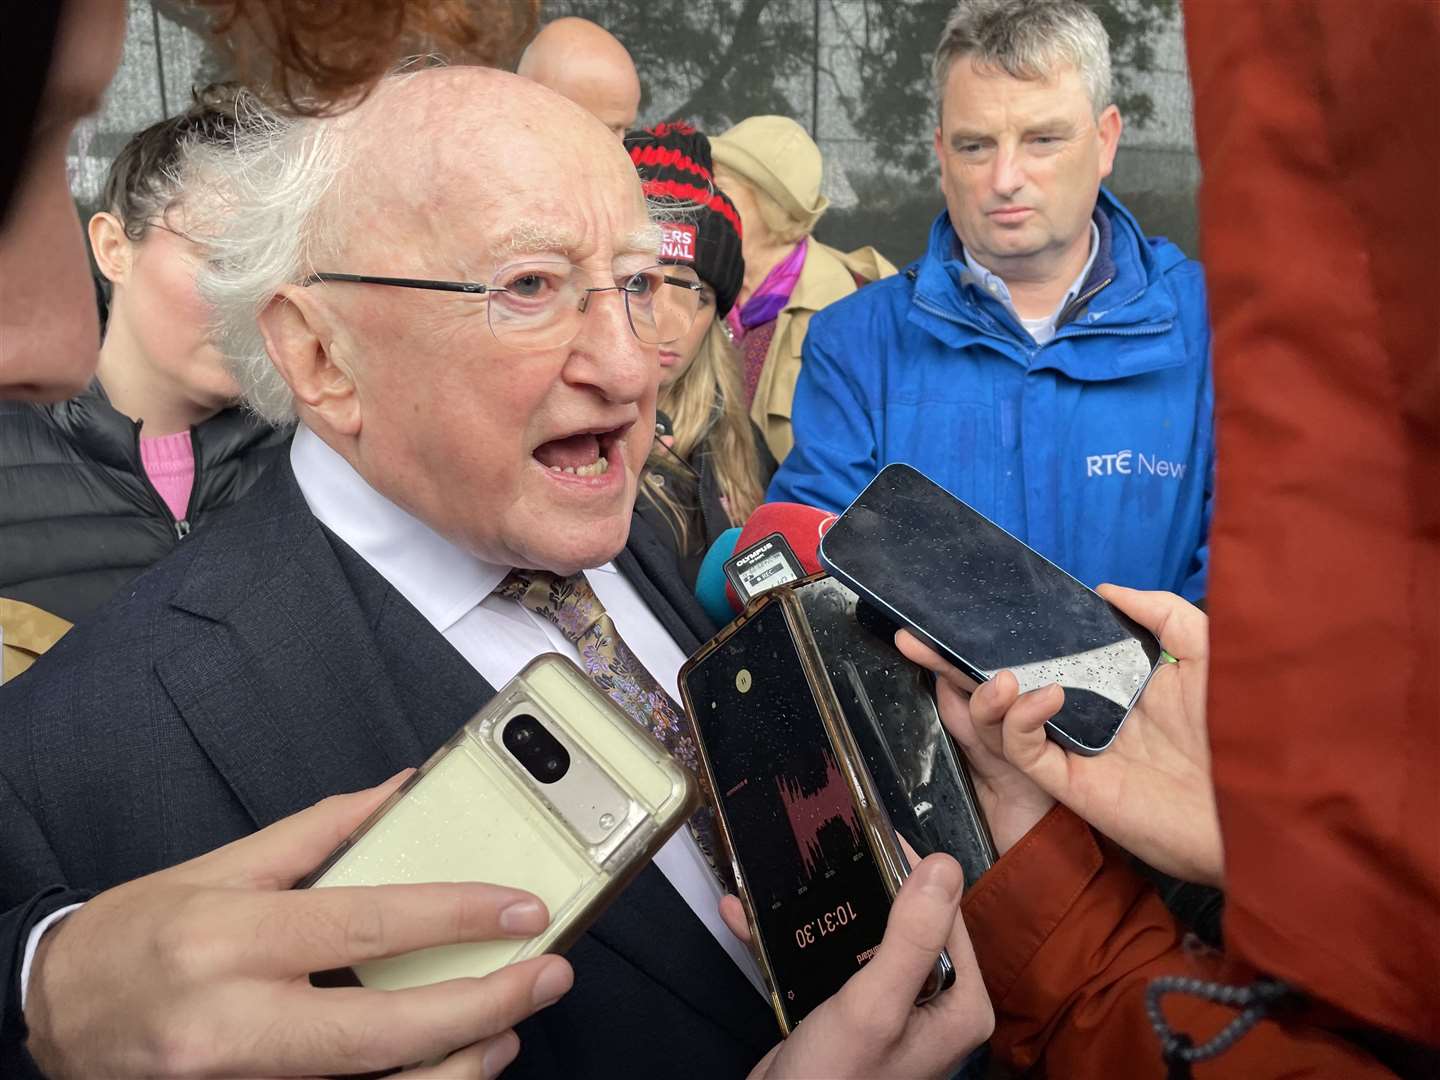 Michael D Higgins speaks to the media about climate change during the National Ploughing Championships at Ratheniska, Co Laois (Grainne Ni Aodha/PA)